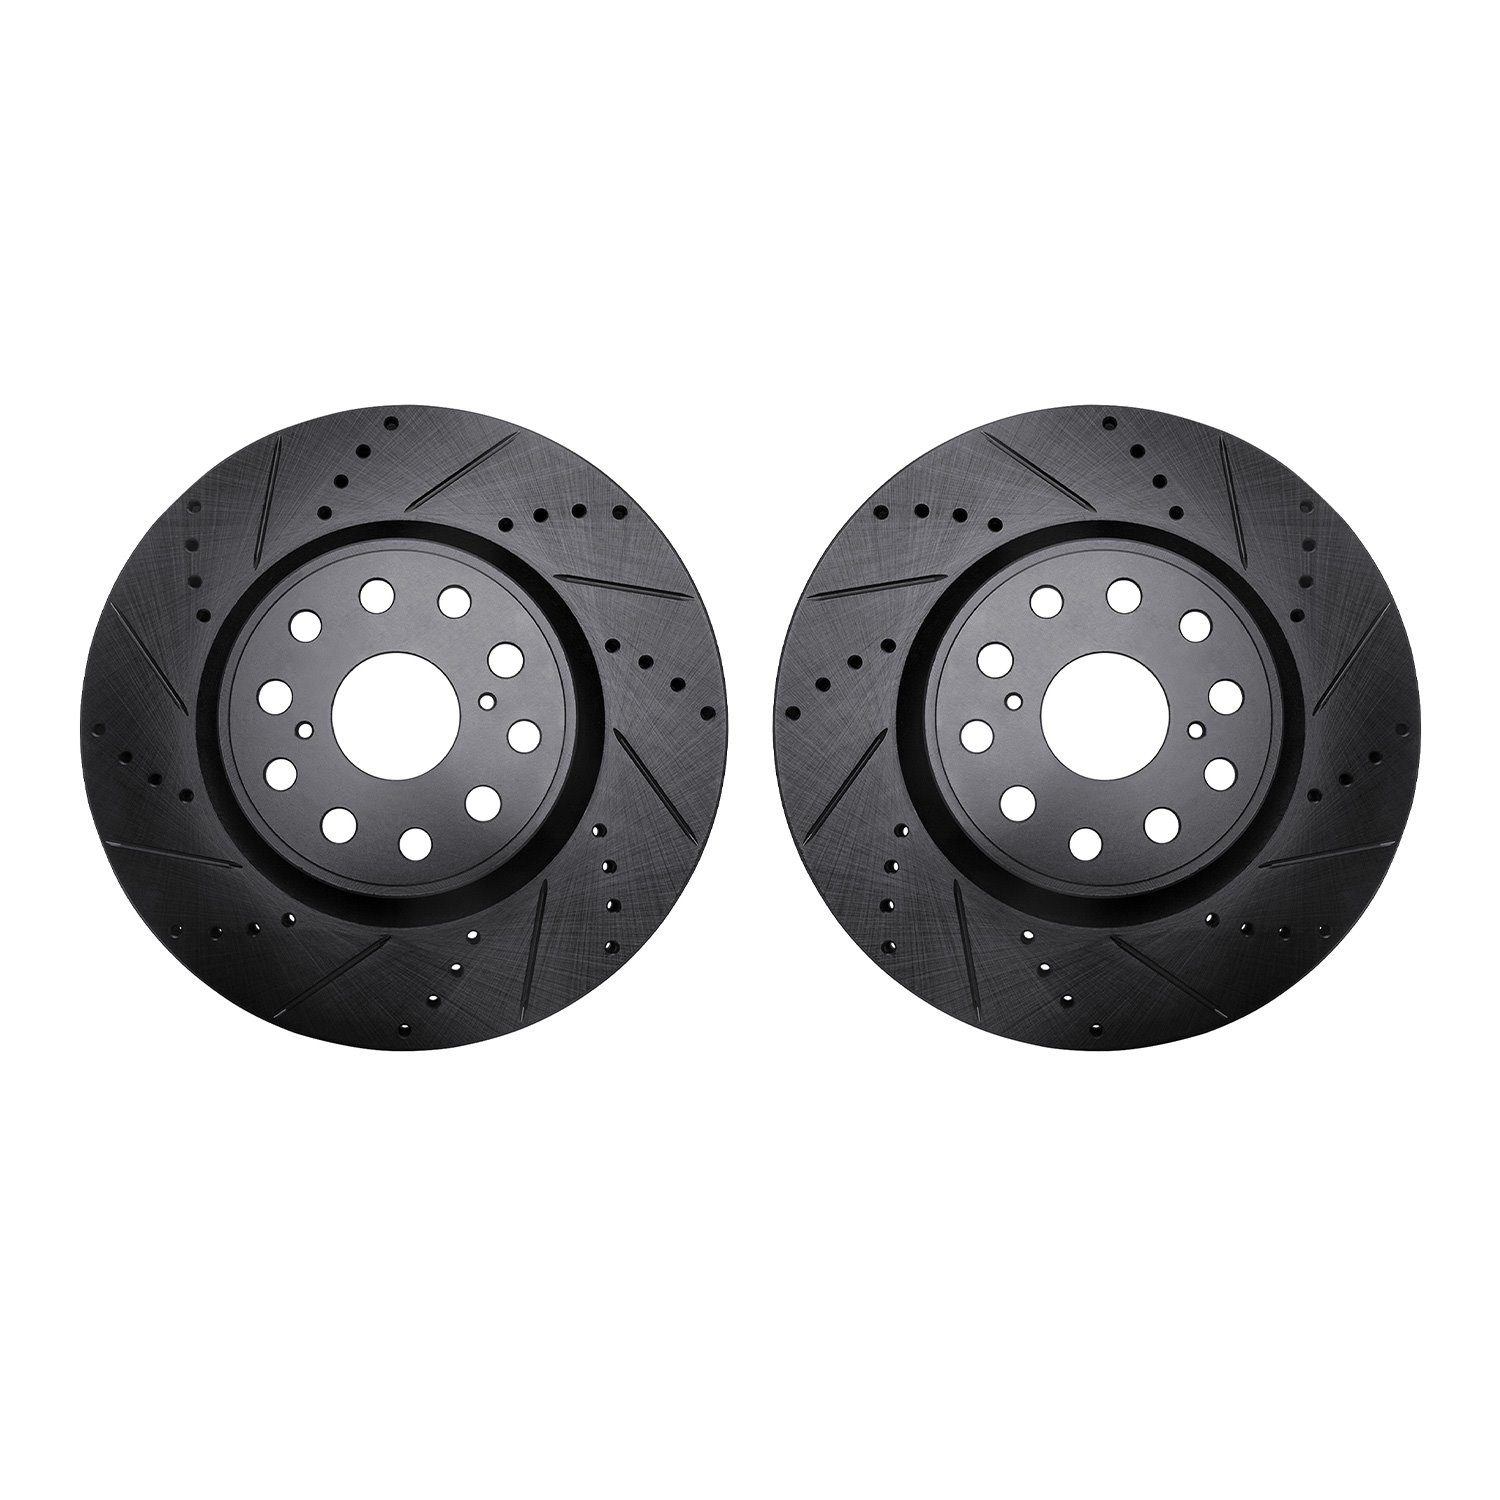 Drilled/Slotted Brake Rotors [Black], Fits Select Lexus/Toyota/Scion